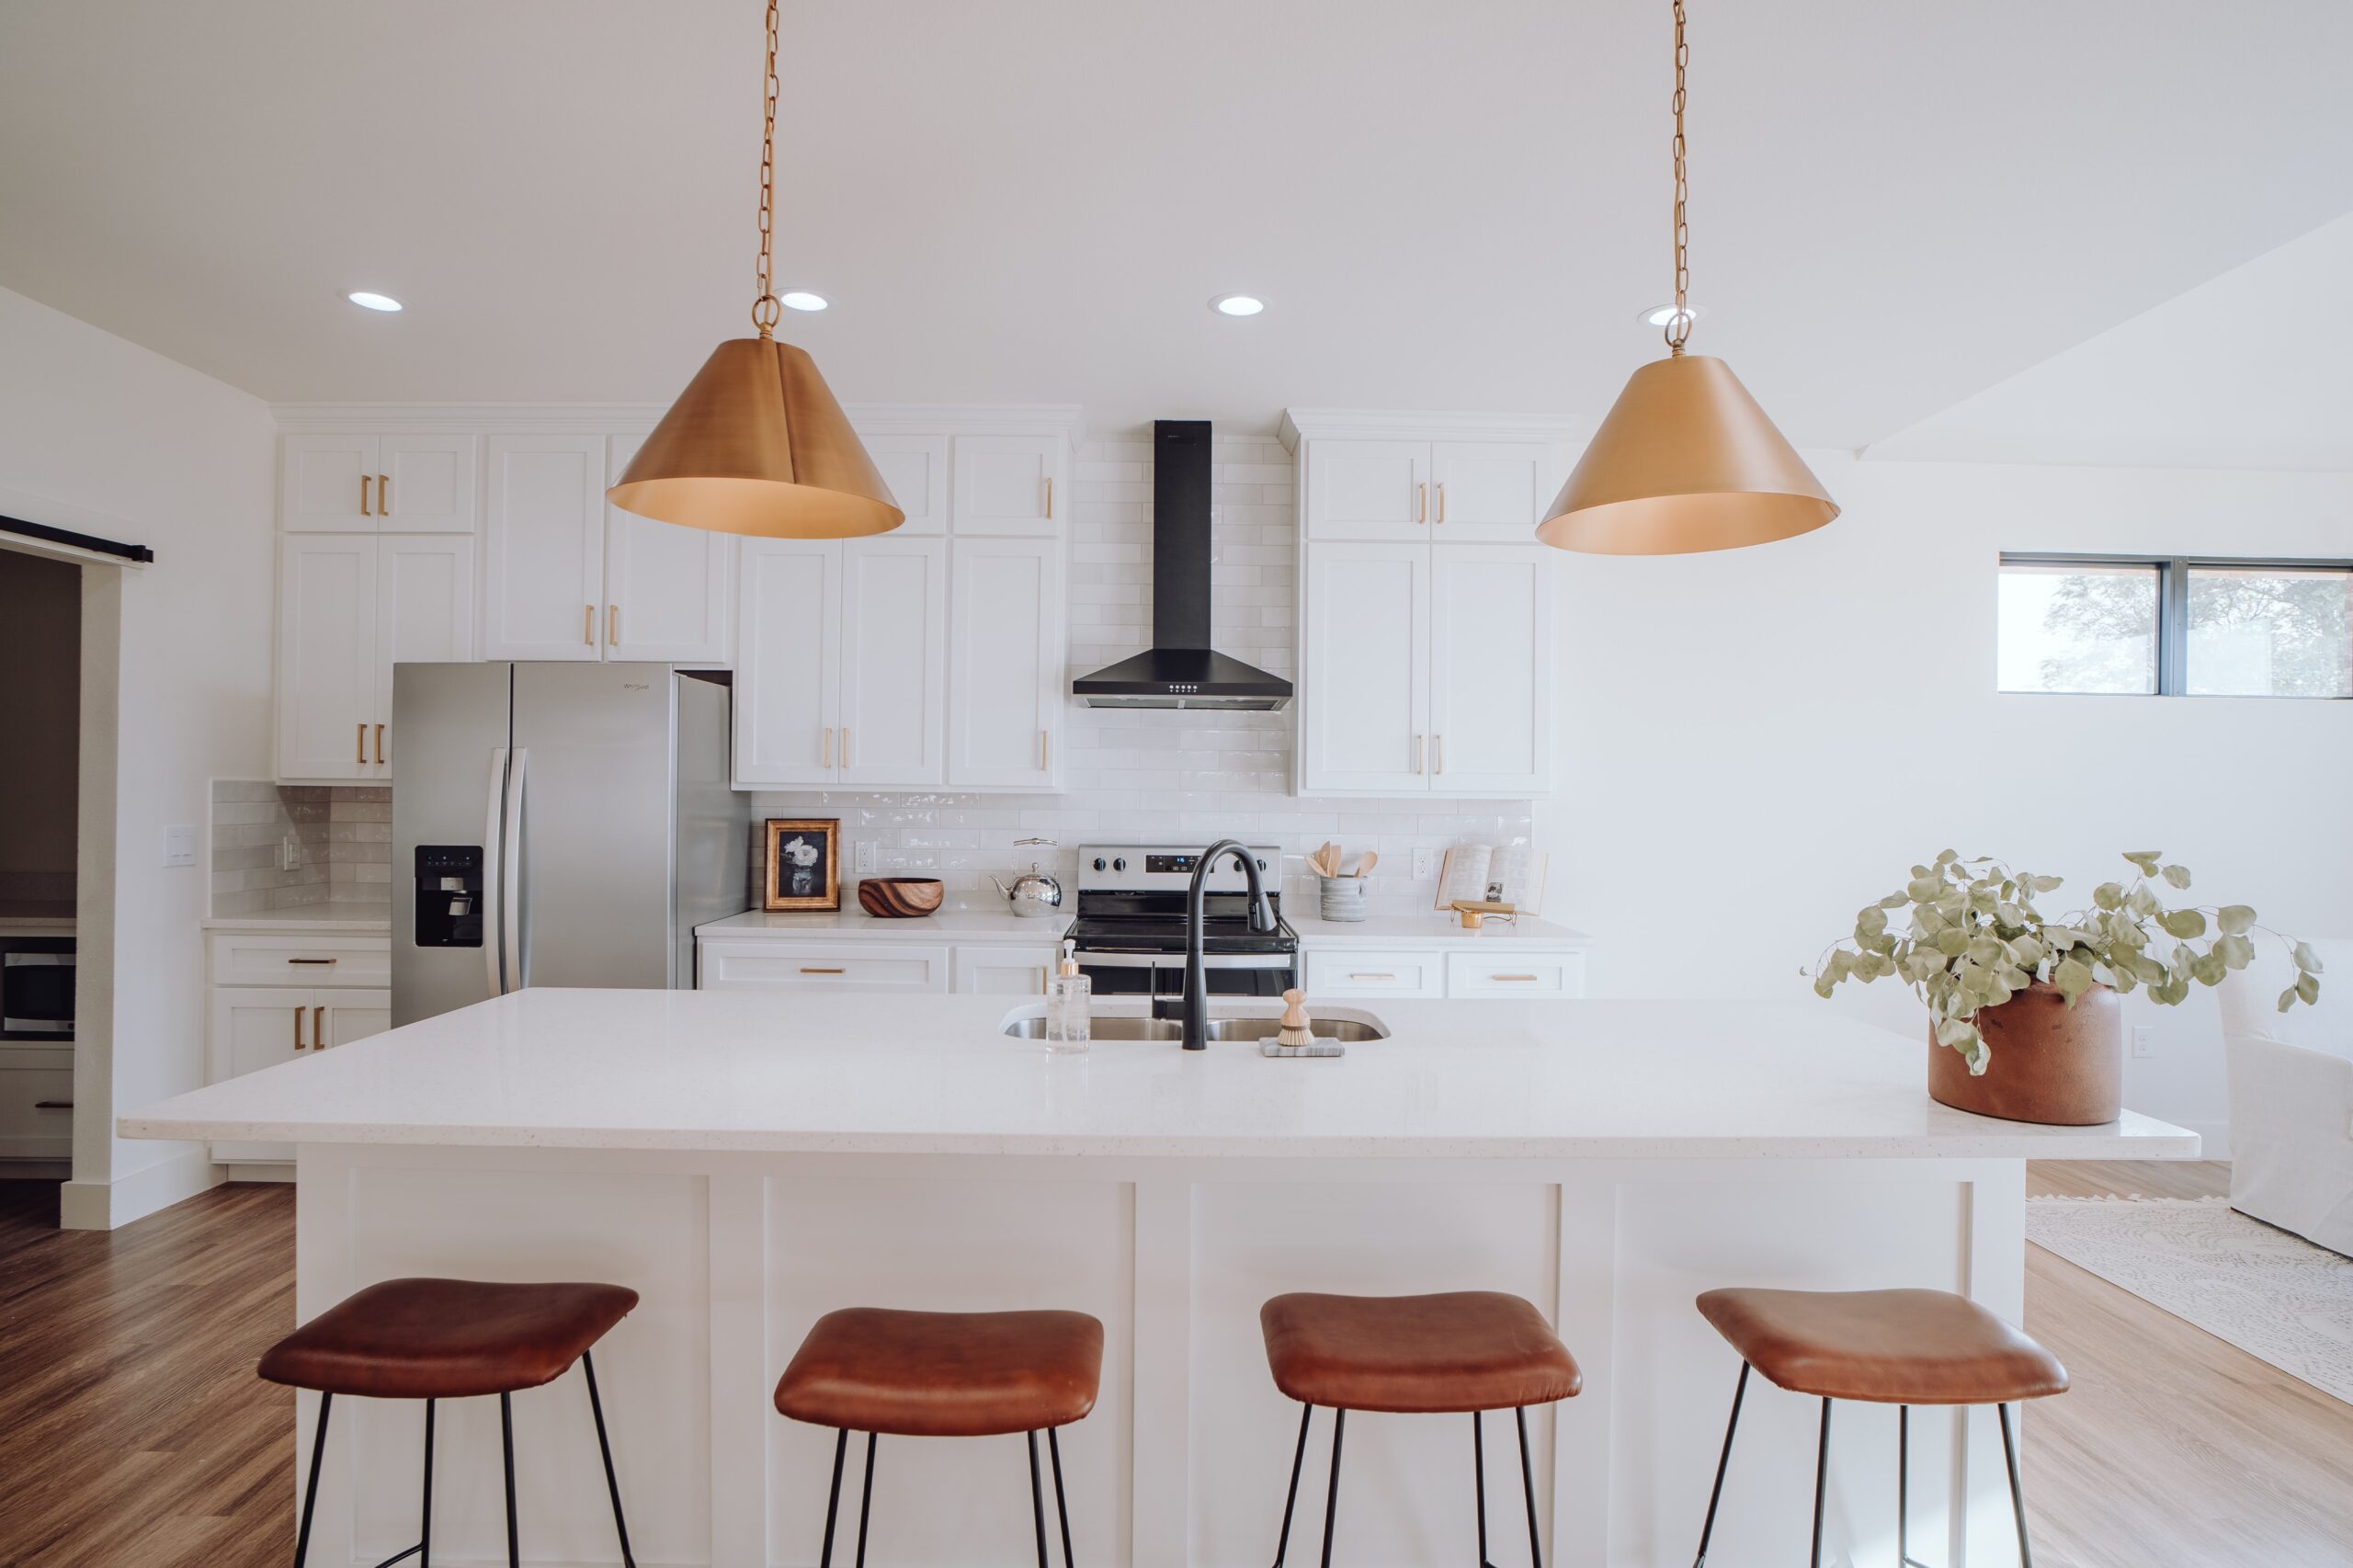 10 Kitchen Renovation Ideas That Will Transform Your Space